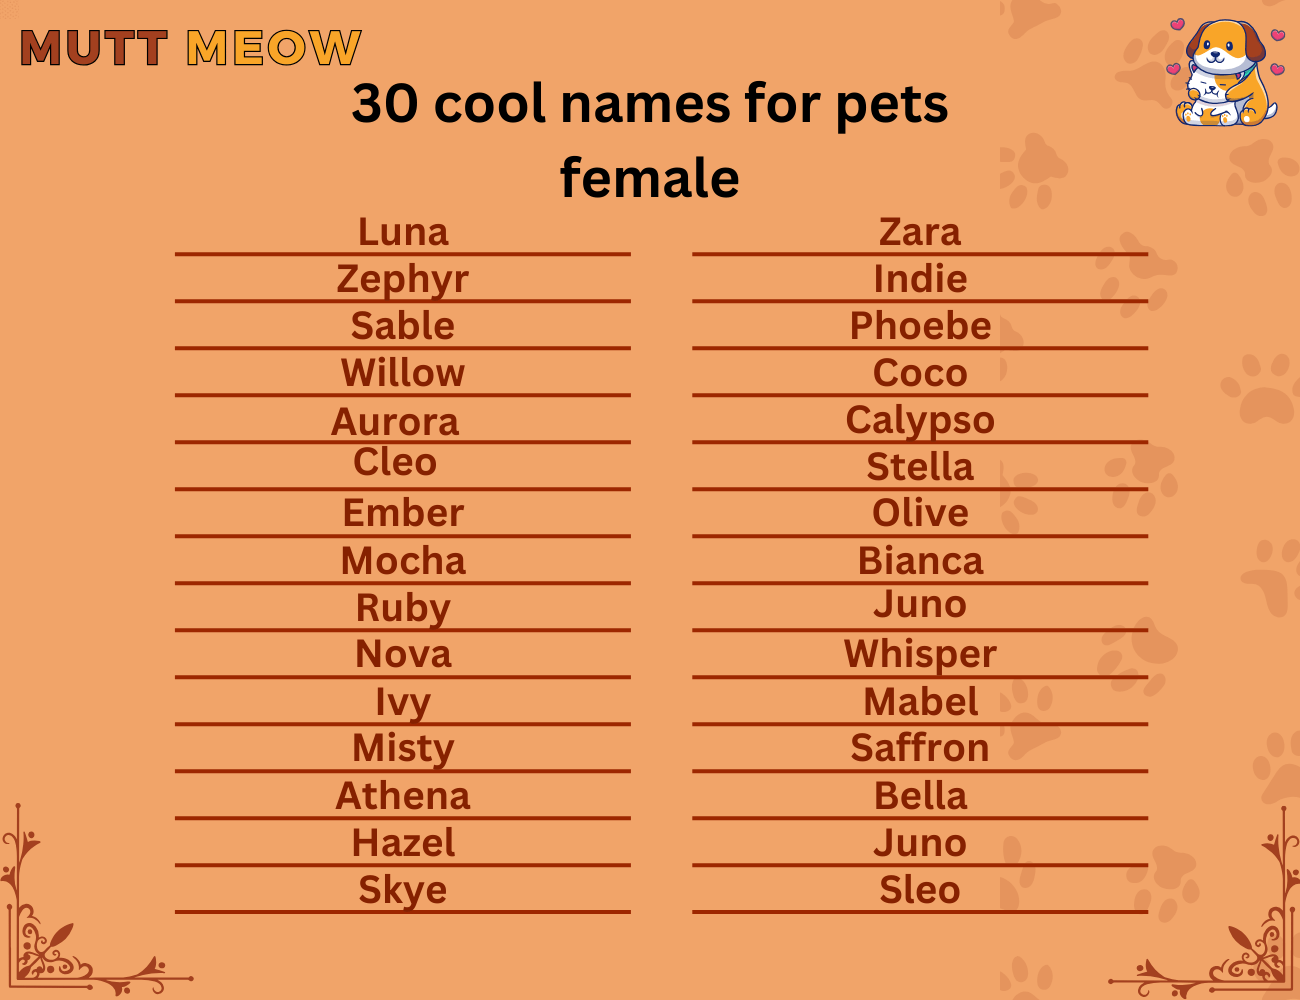 30 cool names for pet female